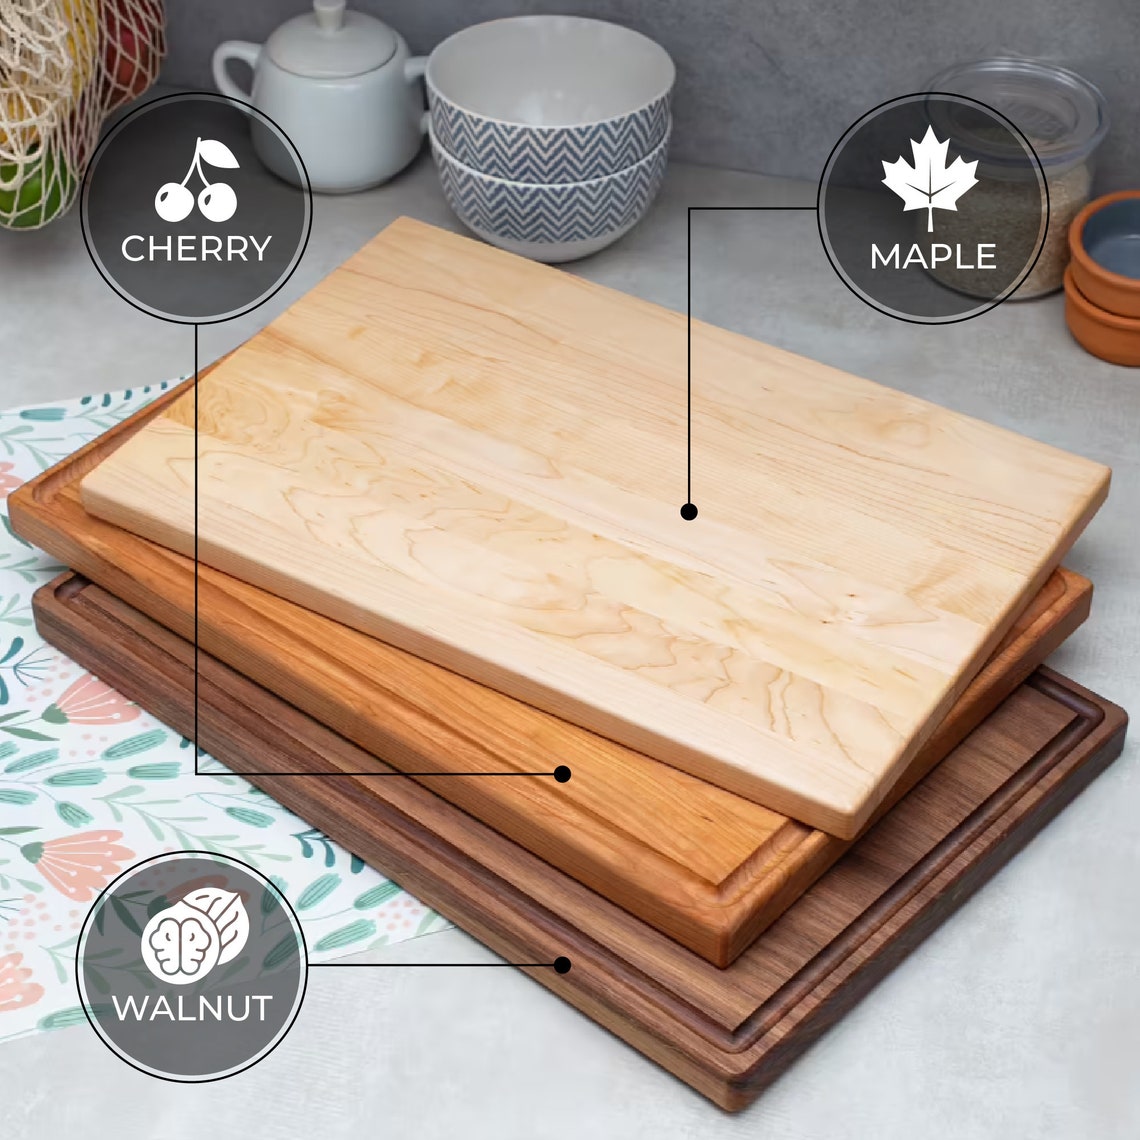 https://forest-decor.com/wp-content/uploads/Personalized-Cheese-Cutting-Board-5-1.jpg